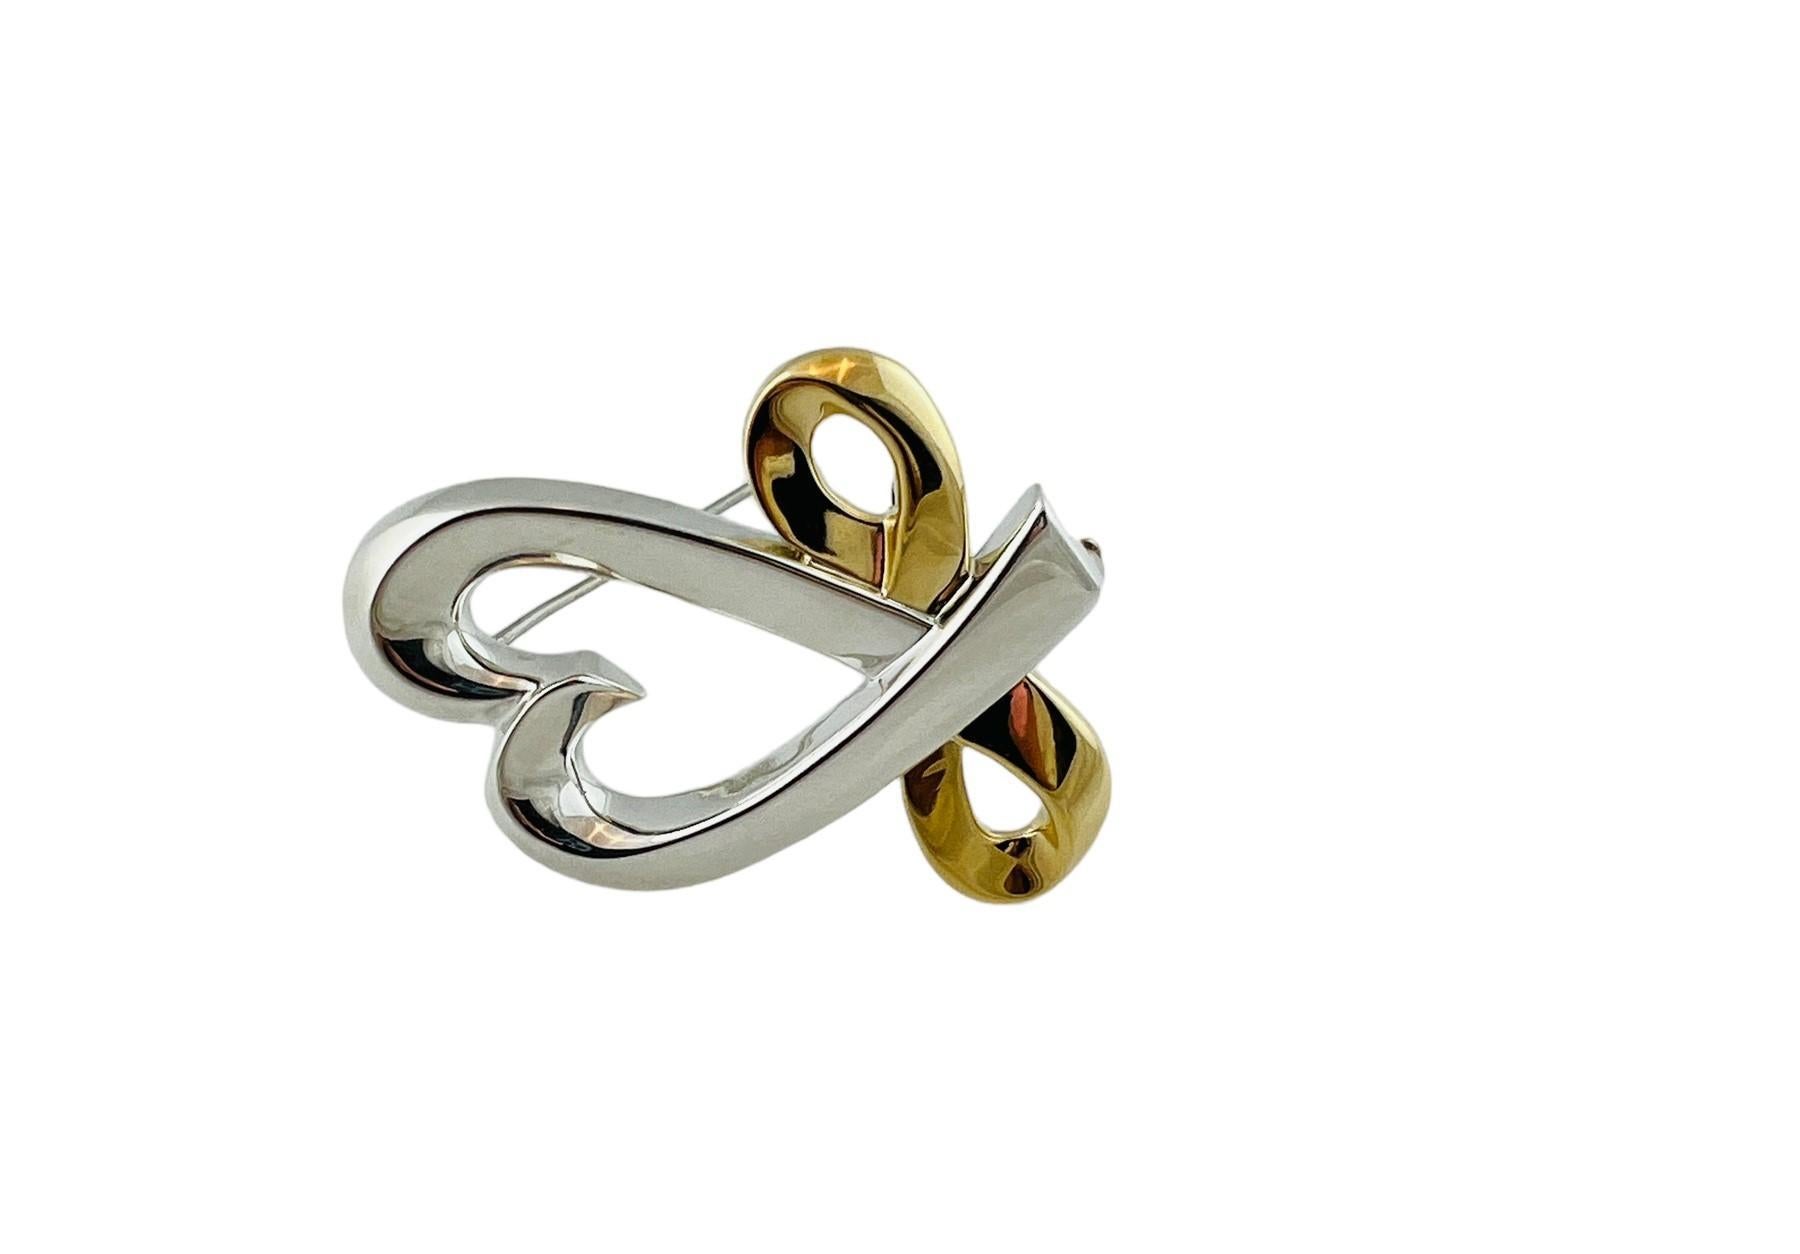 Tiffany & Co. Picasso 18K Gold Sterling Open Heart Infinity Brooch #15427 For Sale 3